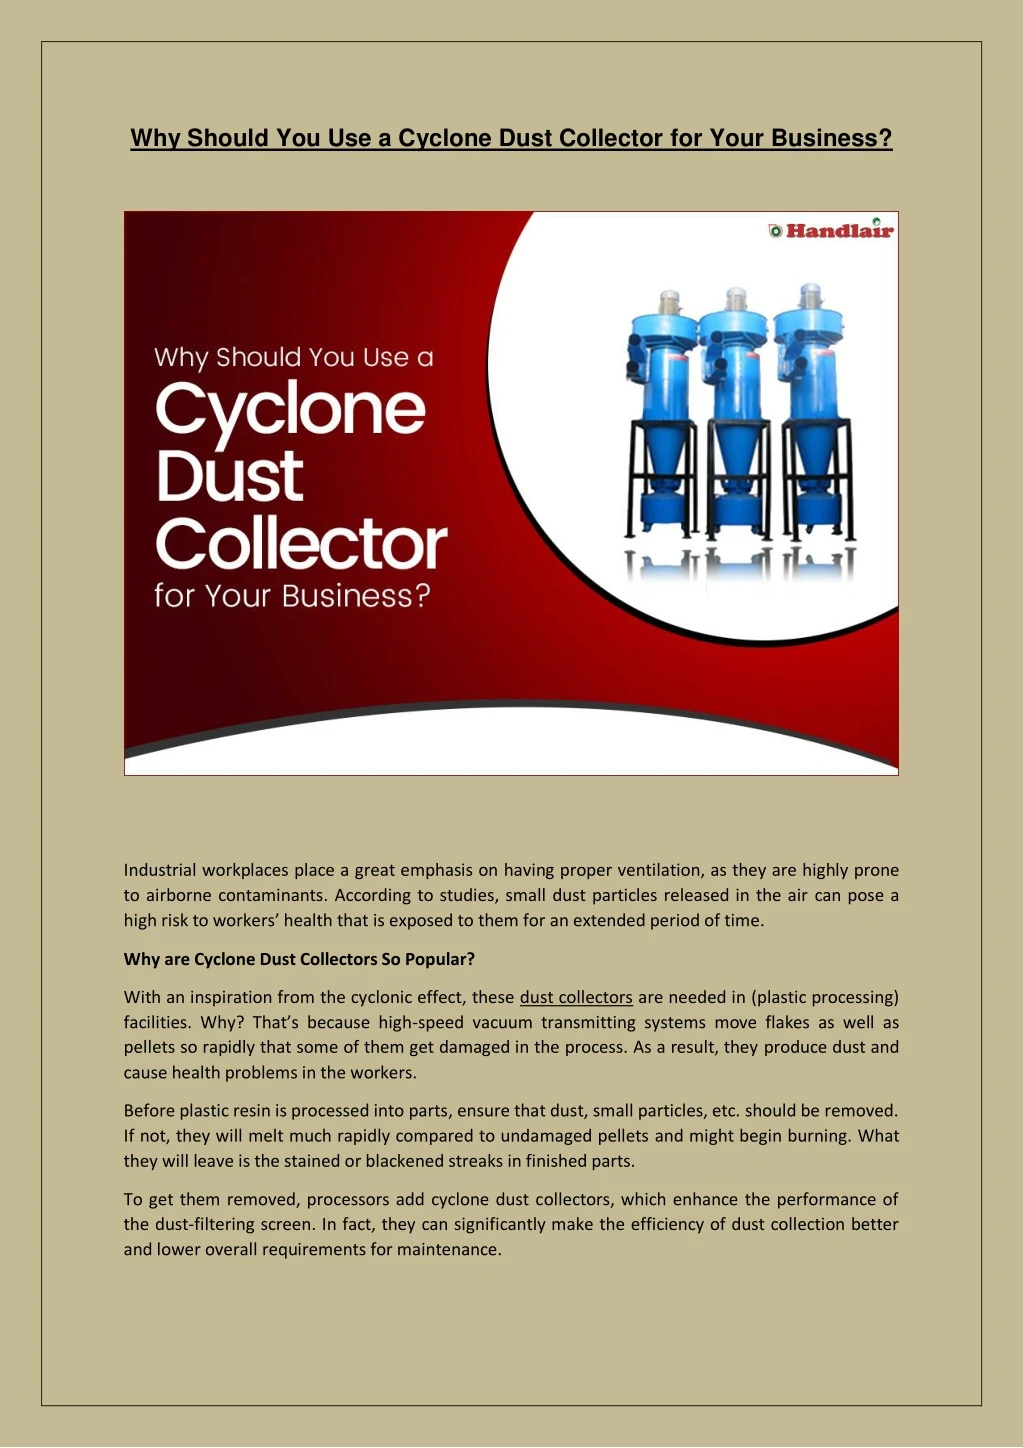 why should you use a cyclone dust collector